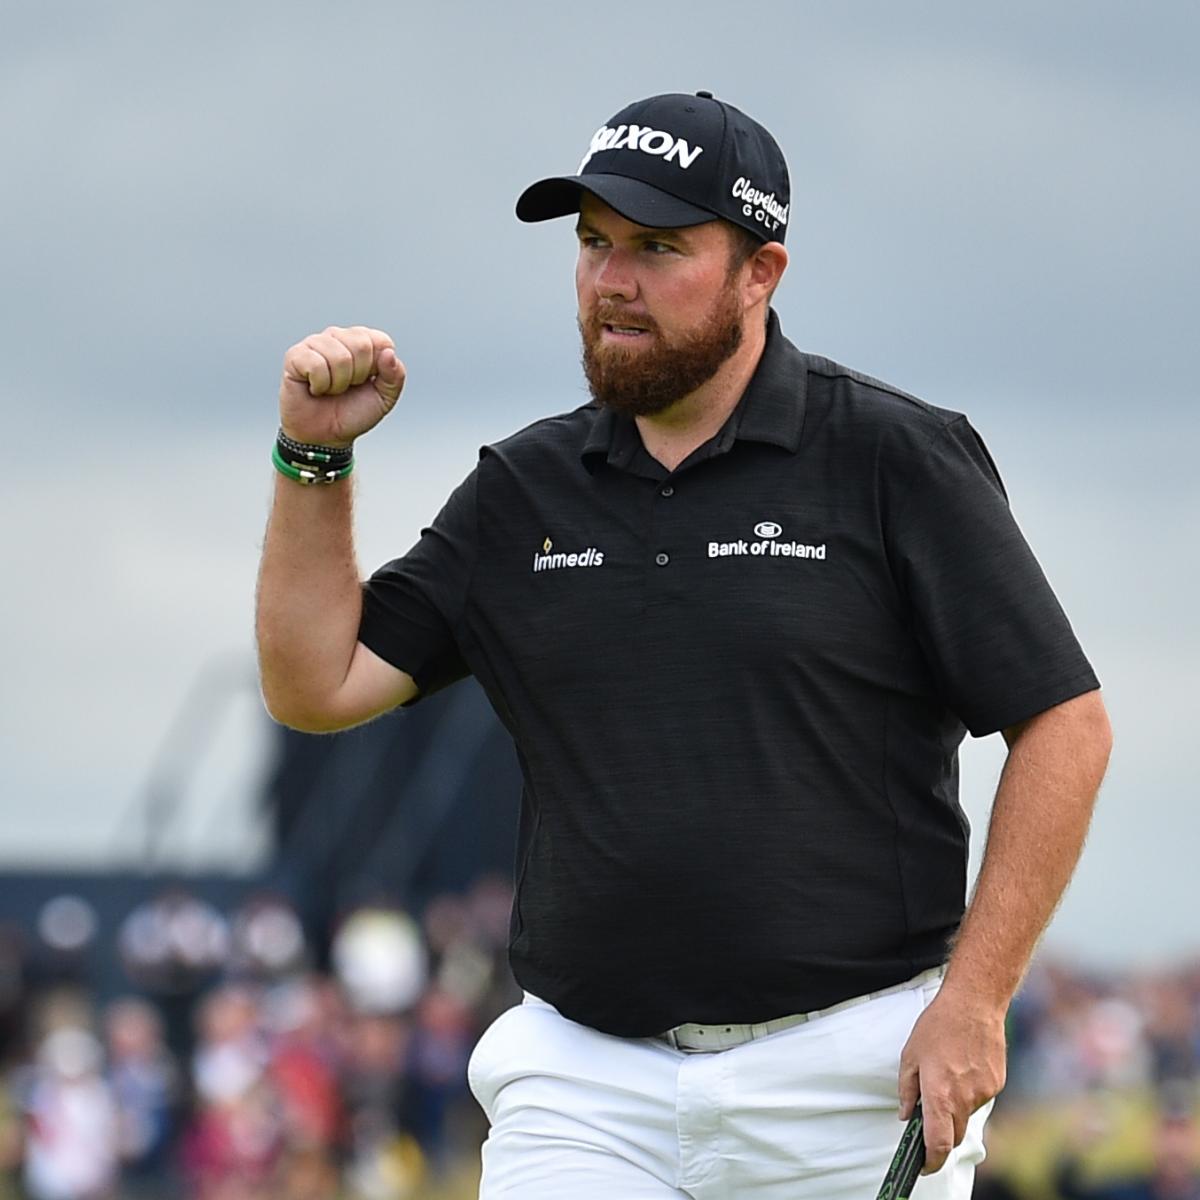 British Open 2019 RealTime Leaderboard Updates for Sunday Leaders